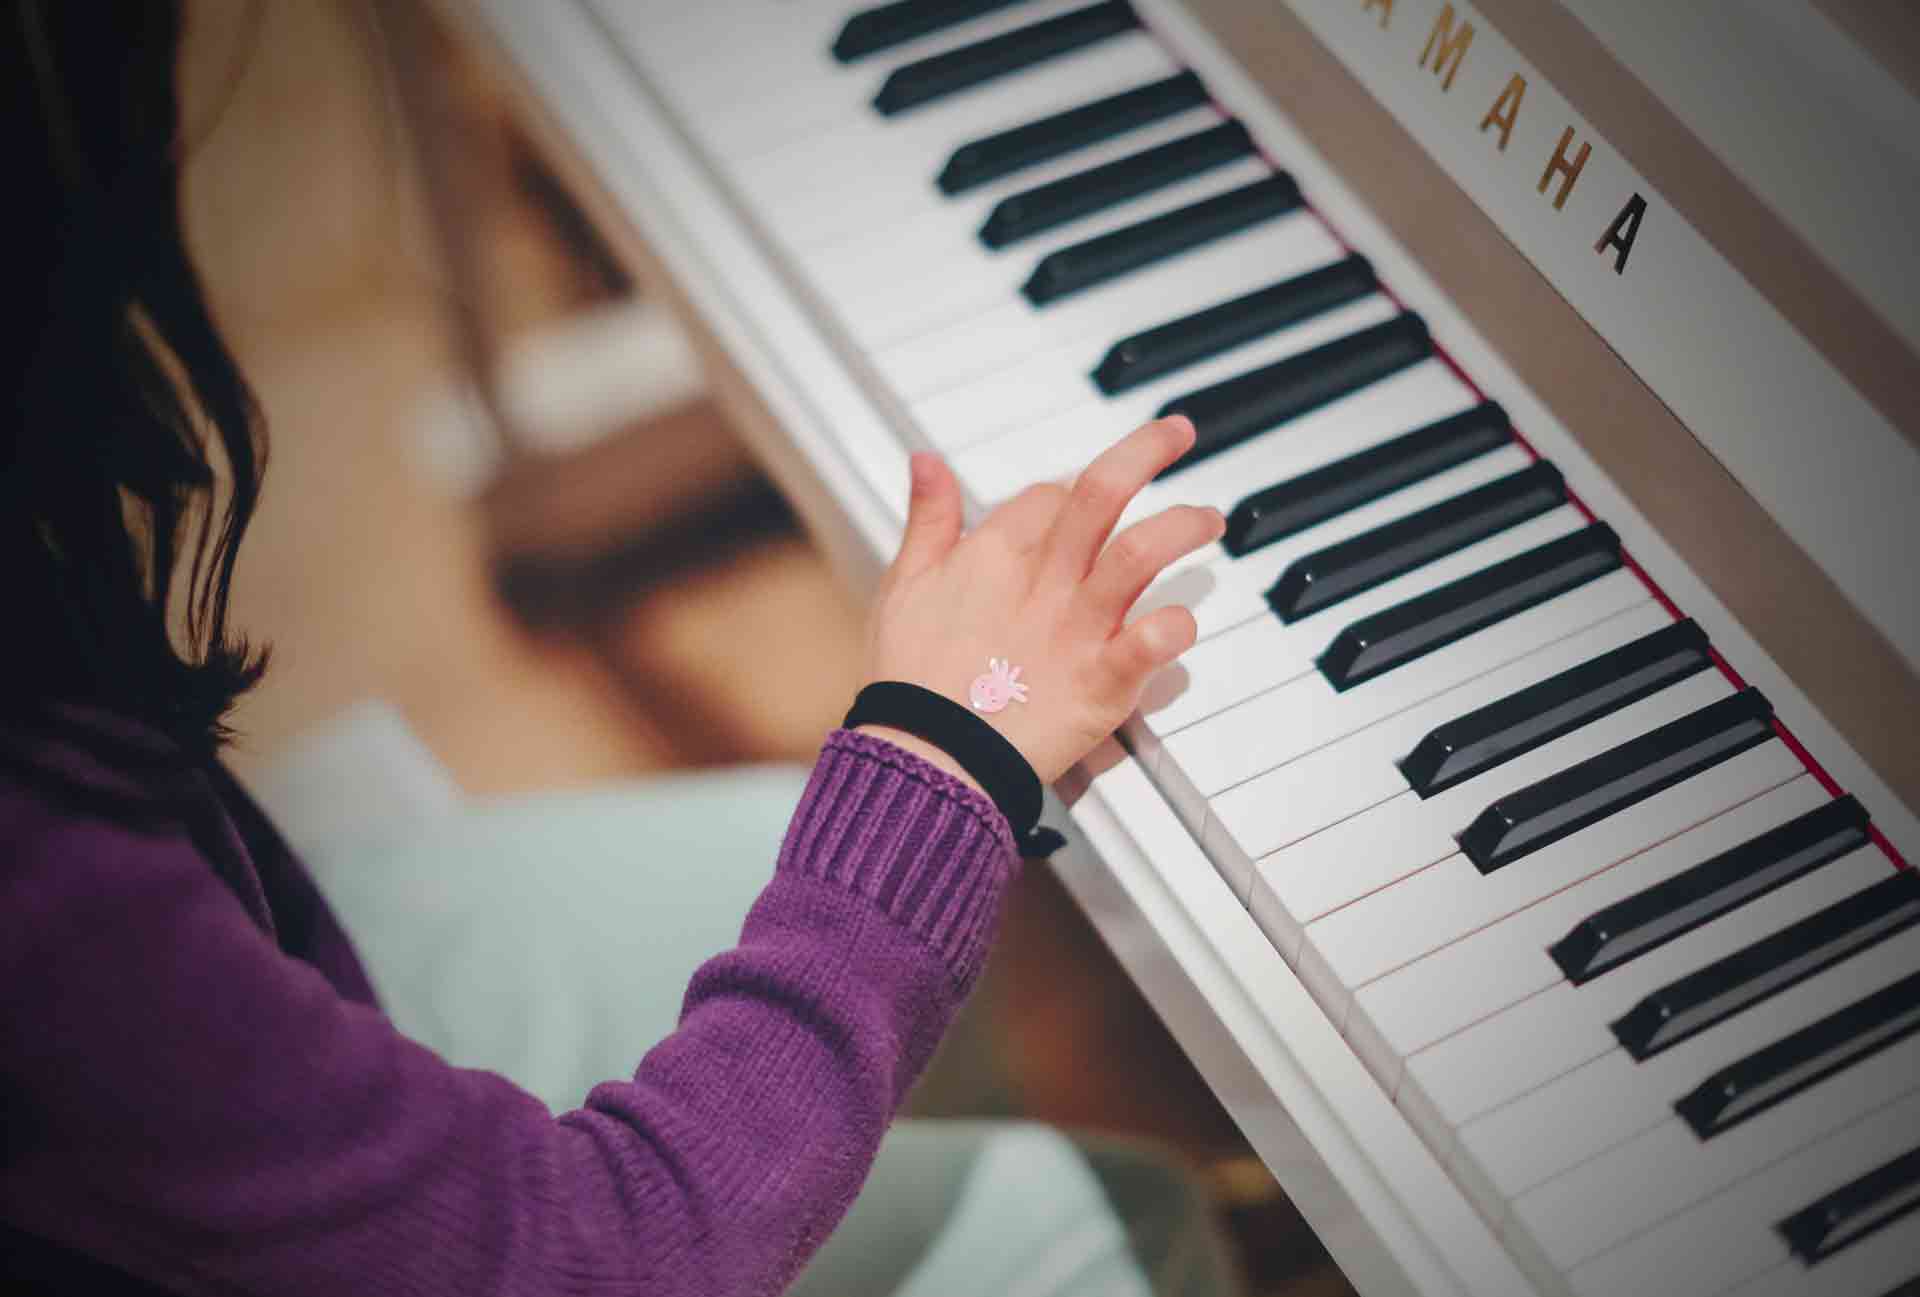 Learning to play an instrument could boost your short-term memory